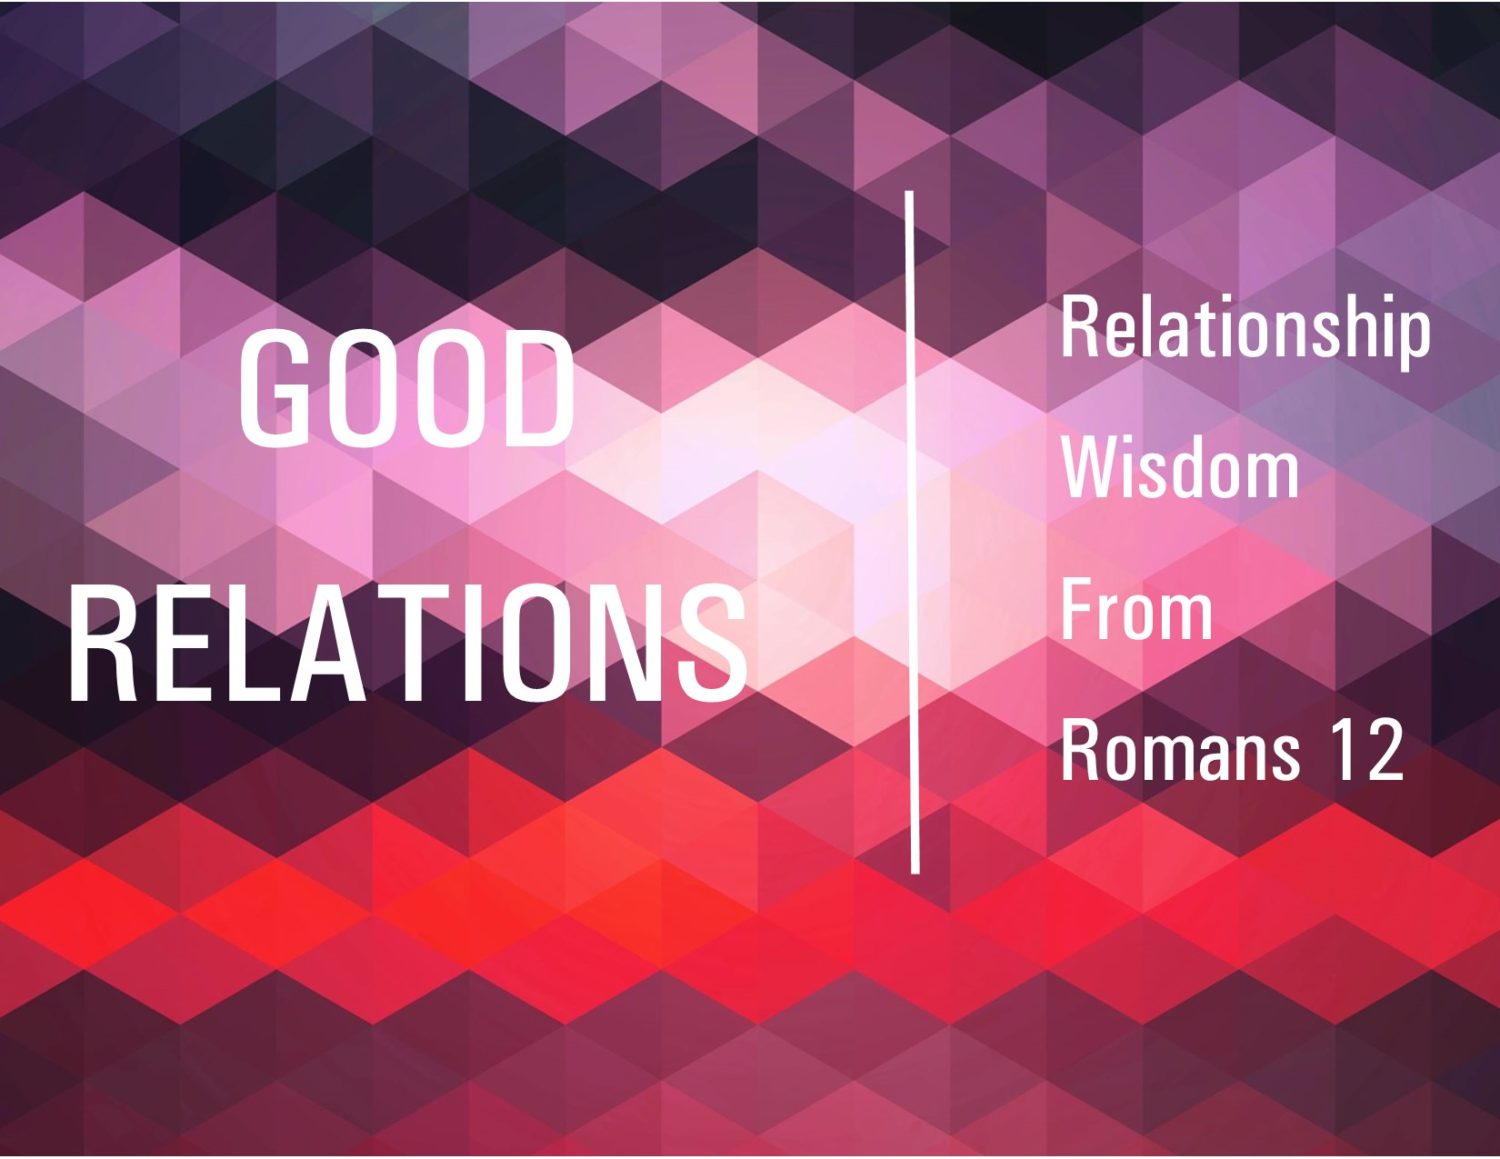 1. Good Relations: Relational Reality